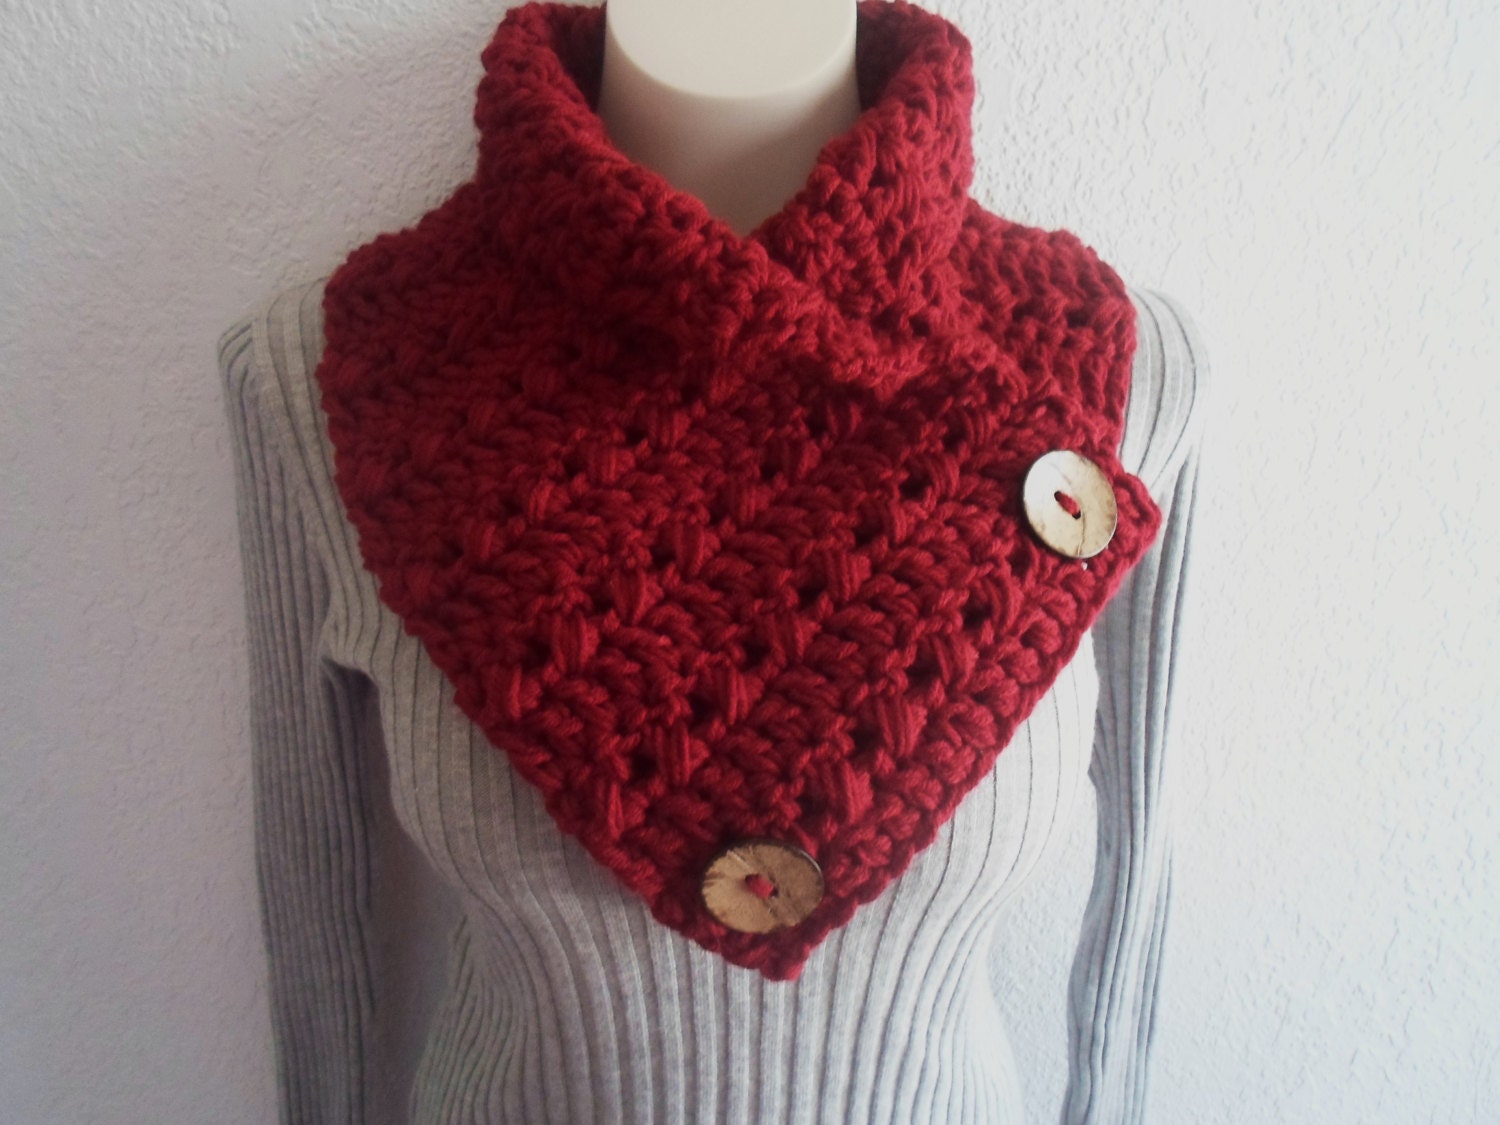 Cranberry Dark Ruby Red Chunky Crochet Cowl Neckwarmer Scarf with Wood Buttons, Ready to Ship